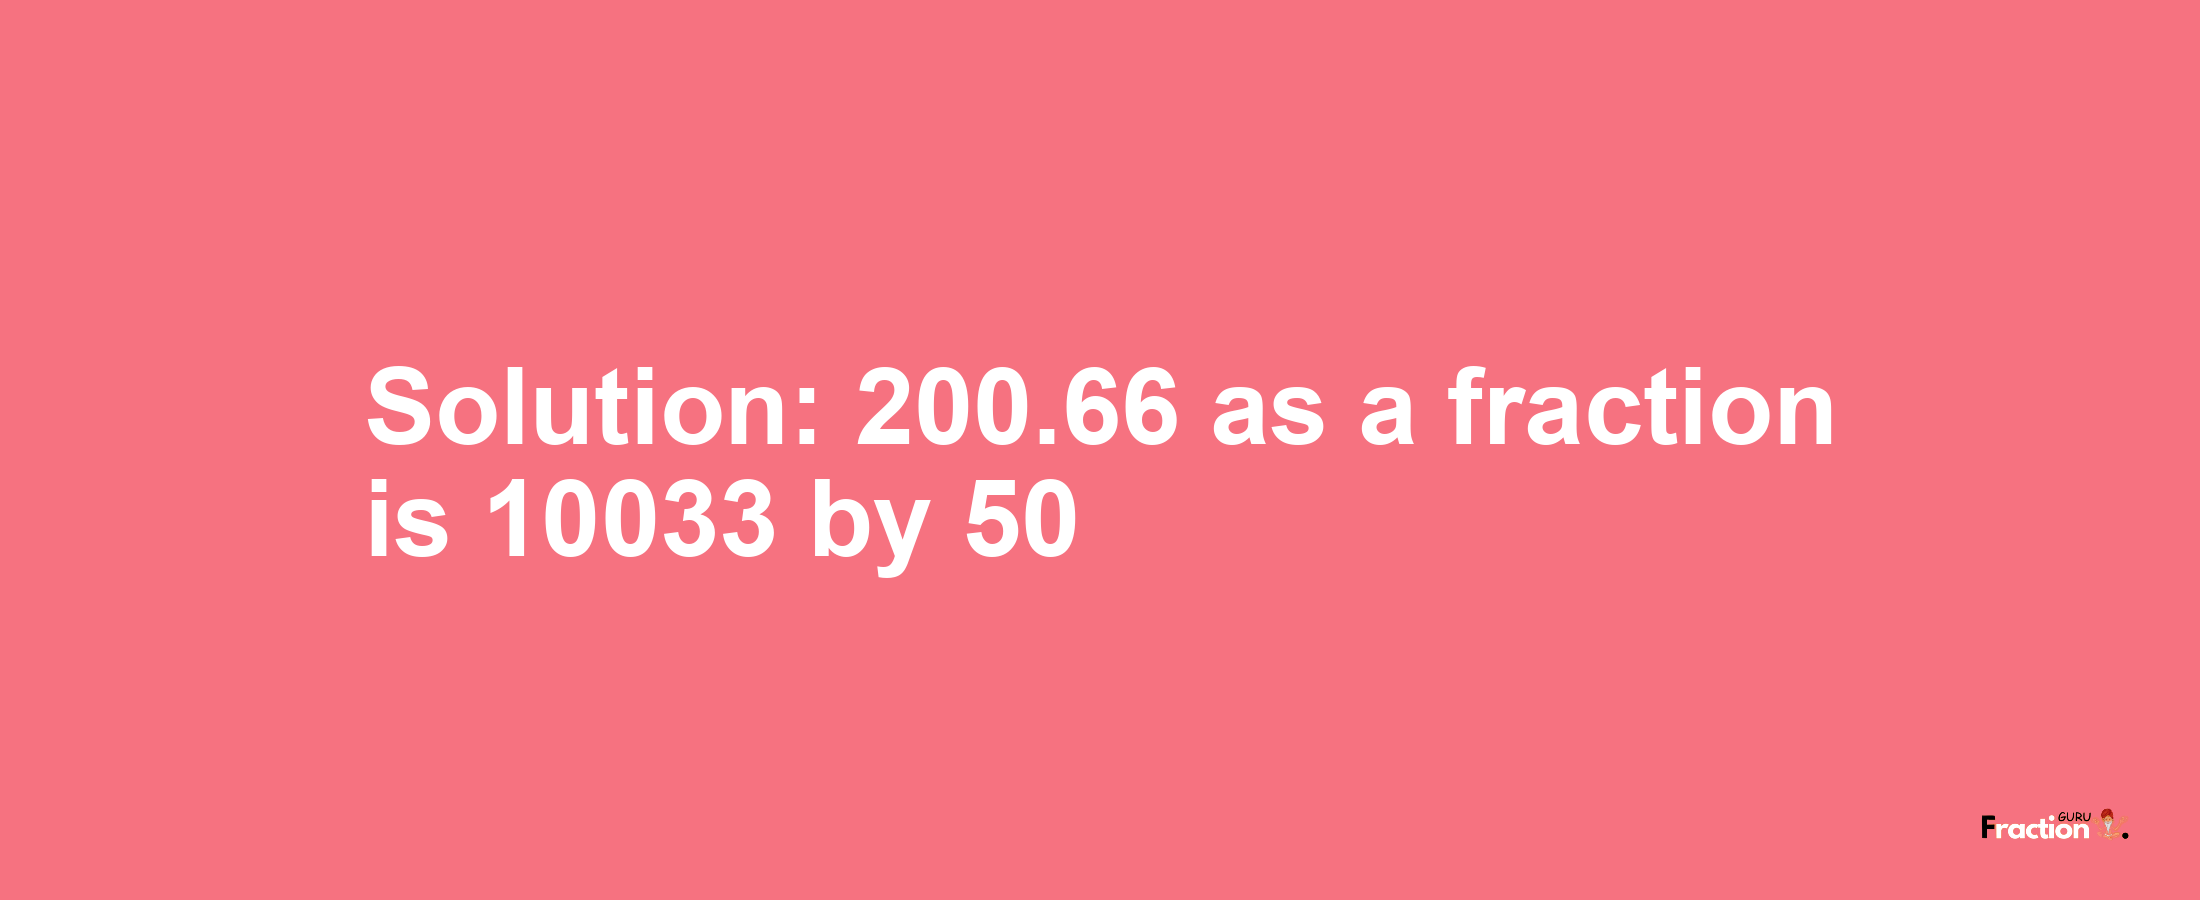 Solution:200.66 as a fraction is 10033/50